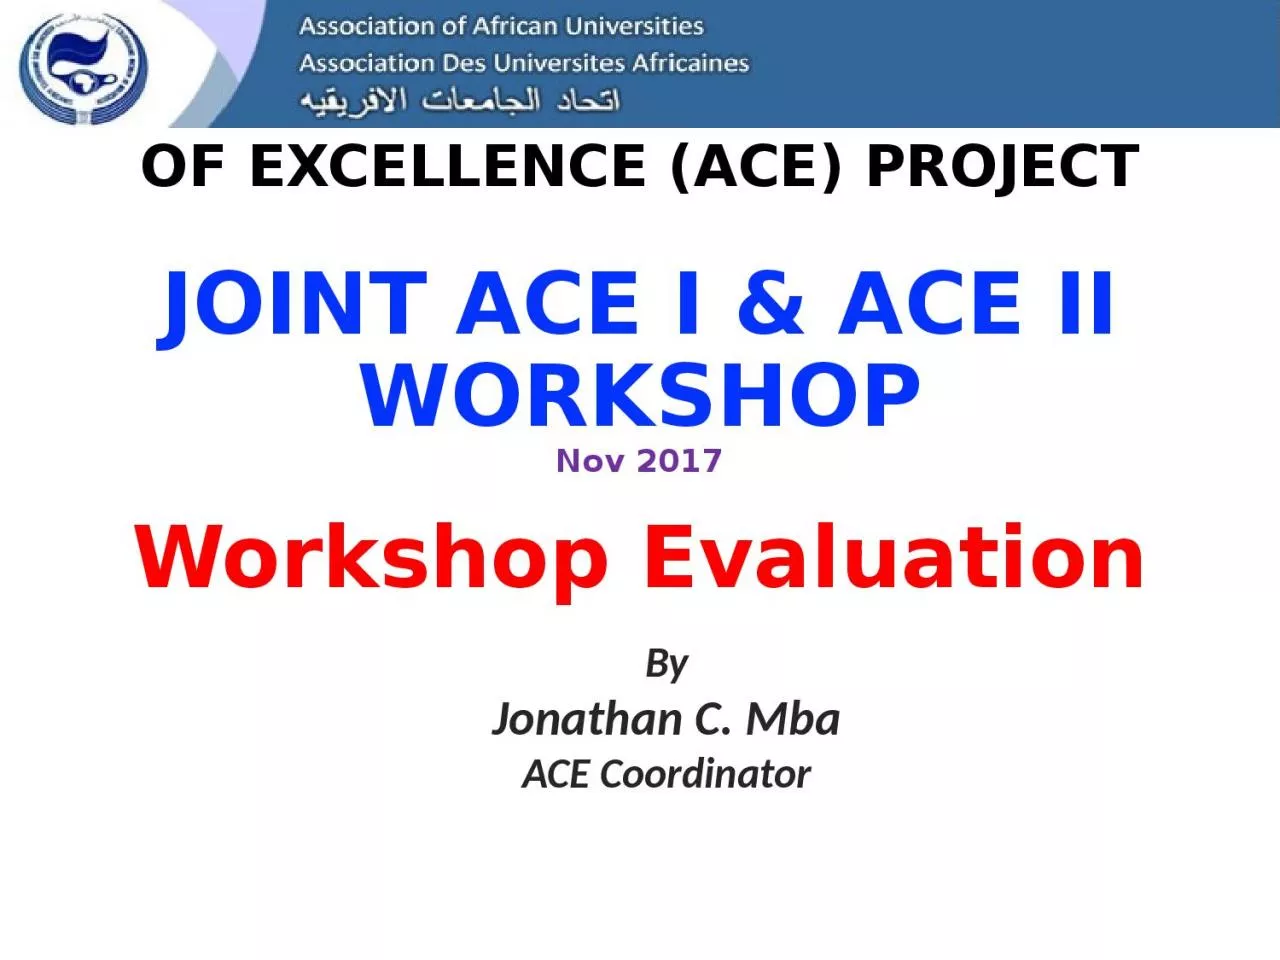 AFRICA HIGHER EDUCATION CENTRES OF EXCELLENCE (ACE) PROJECT